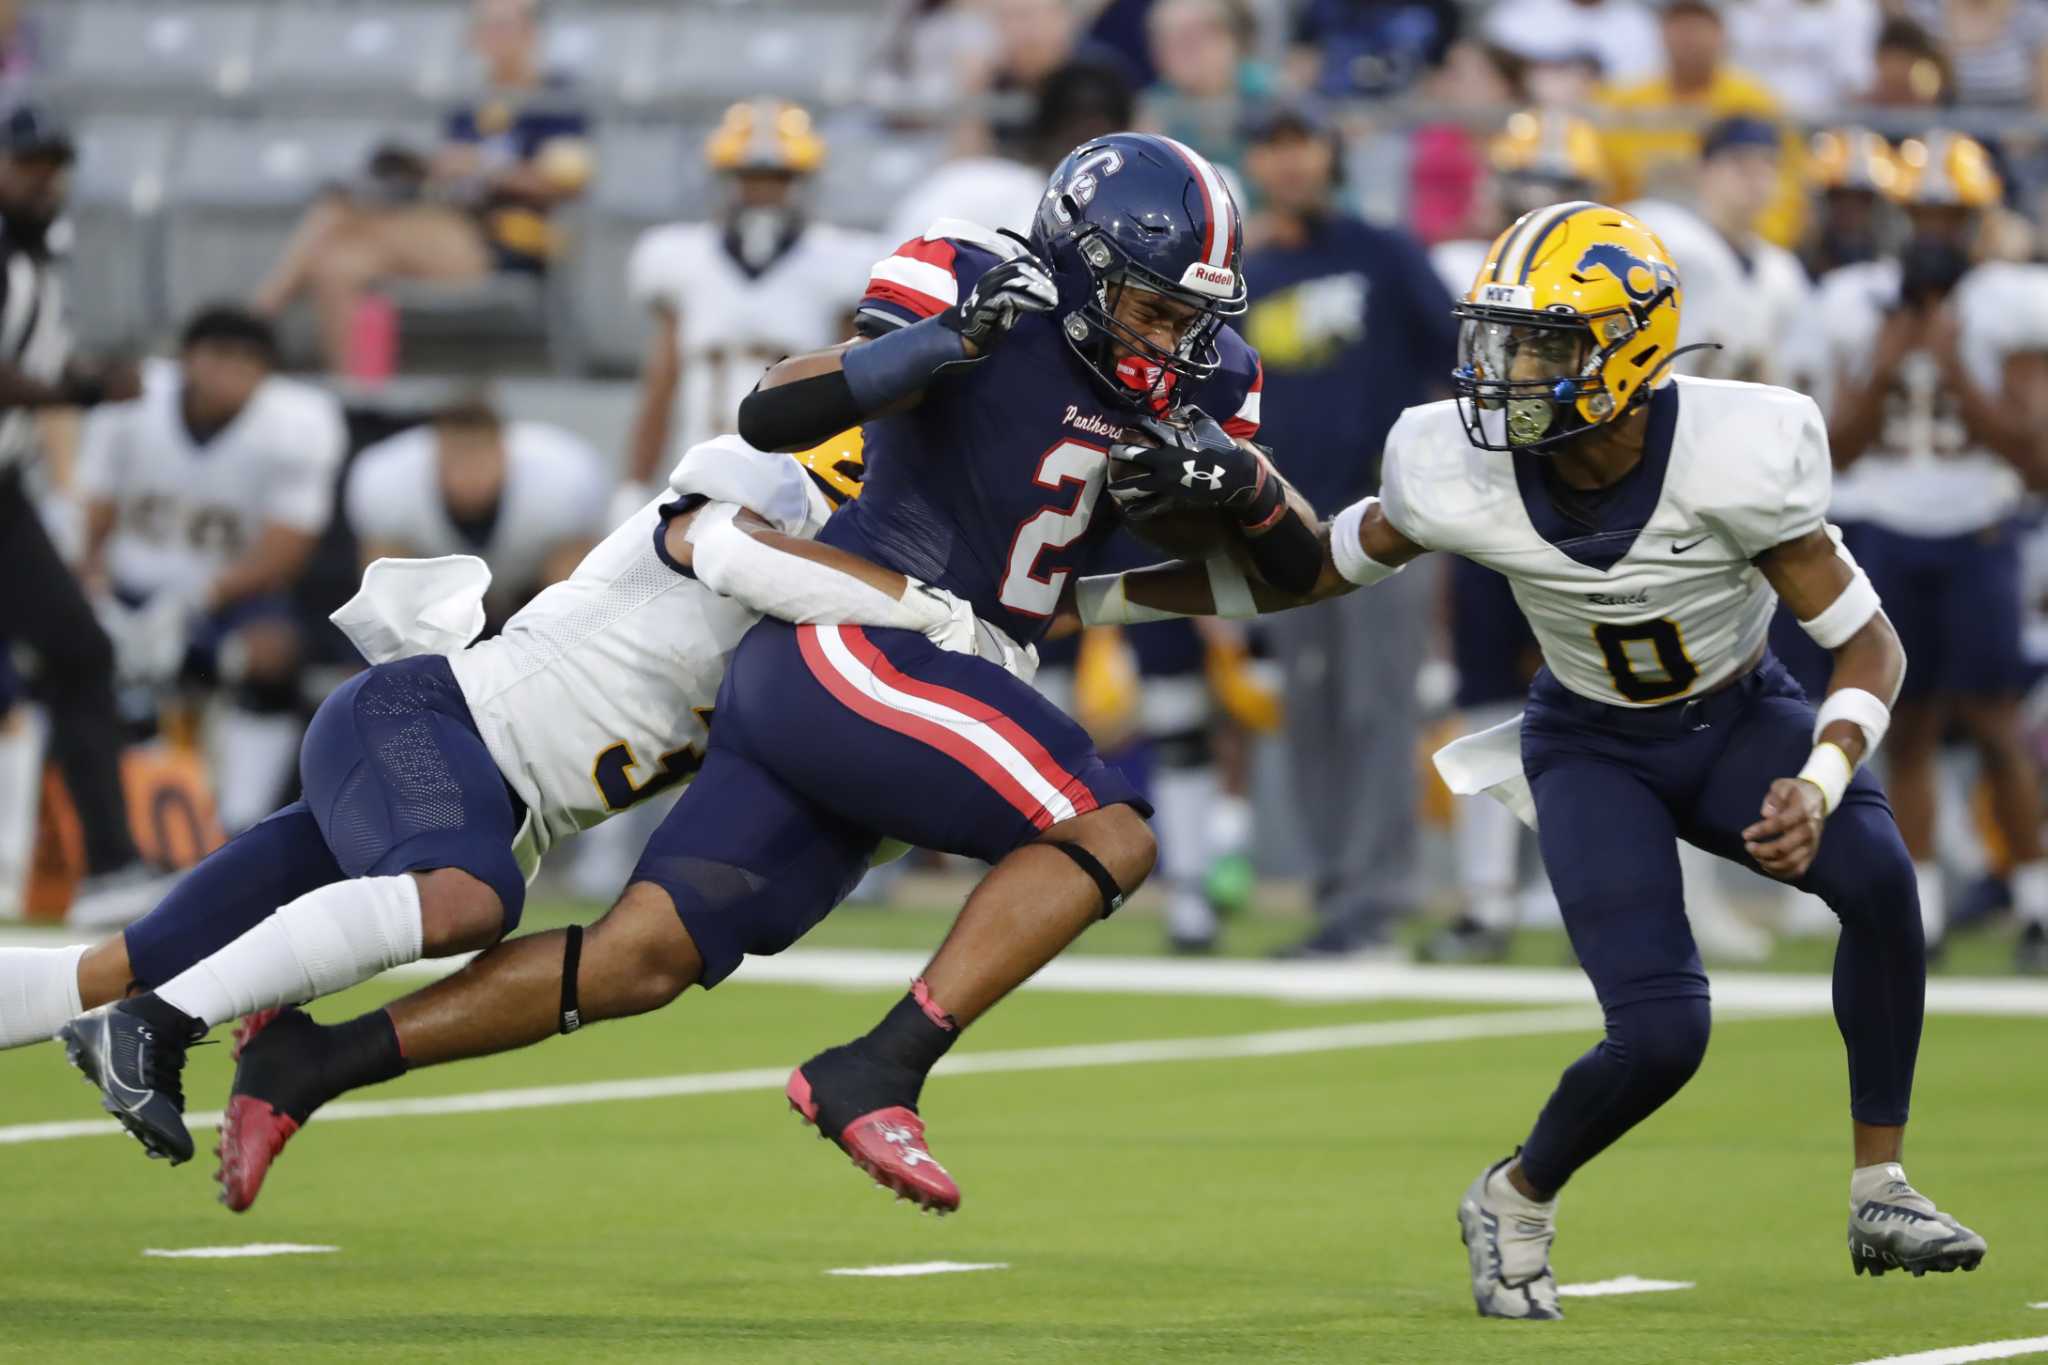 HS football: Cypress Springs defeats Cy Ranch to remain undefeated